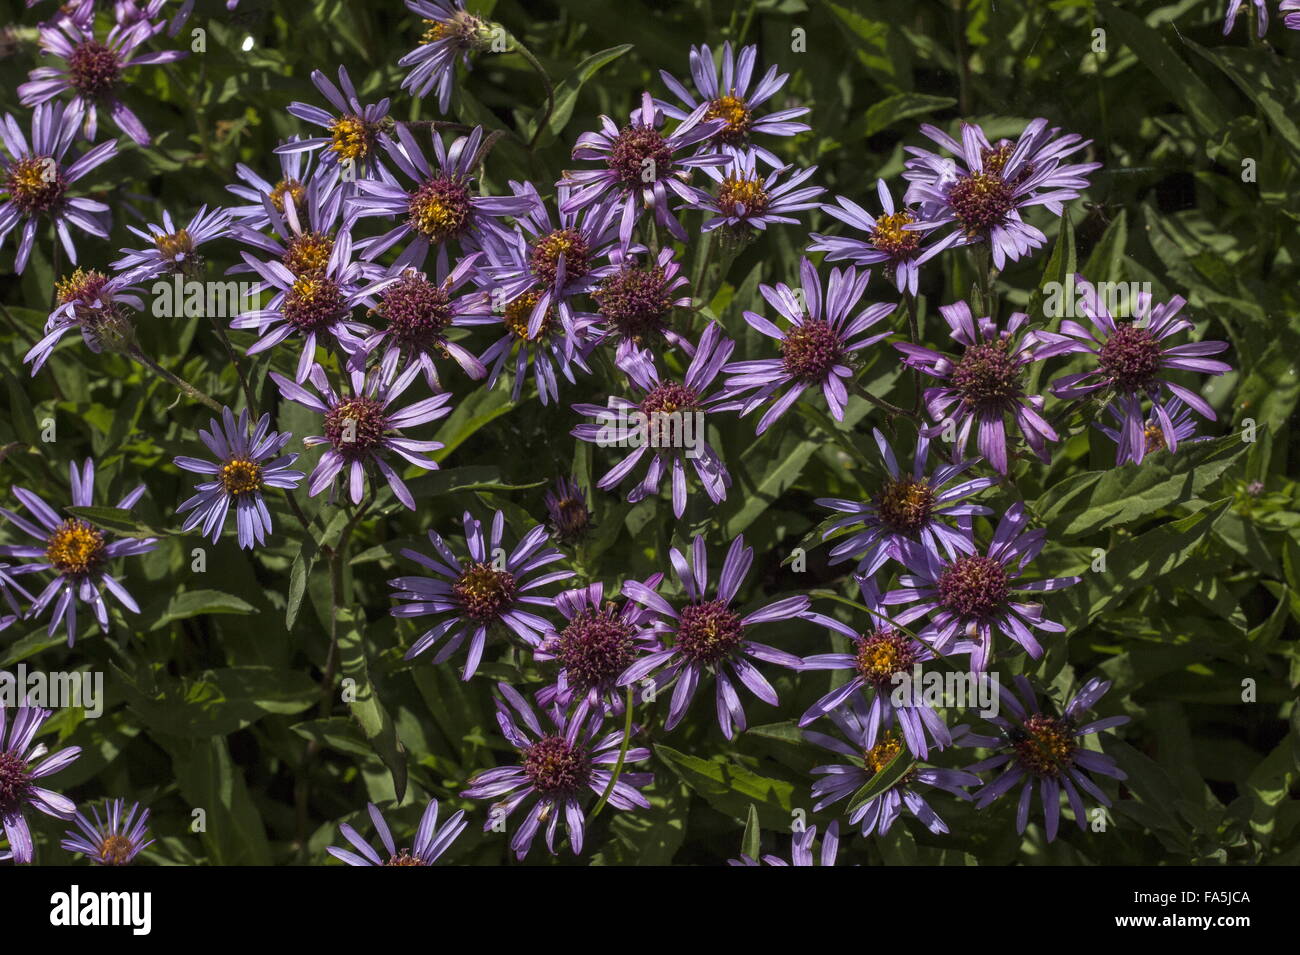 Siberian Aster, Aster sibiricus in flower. Stock Photo